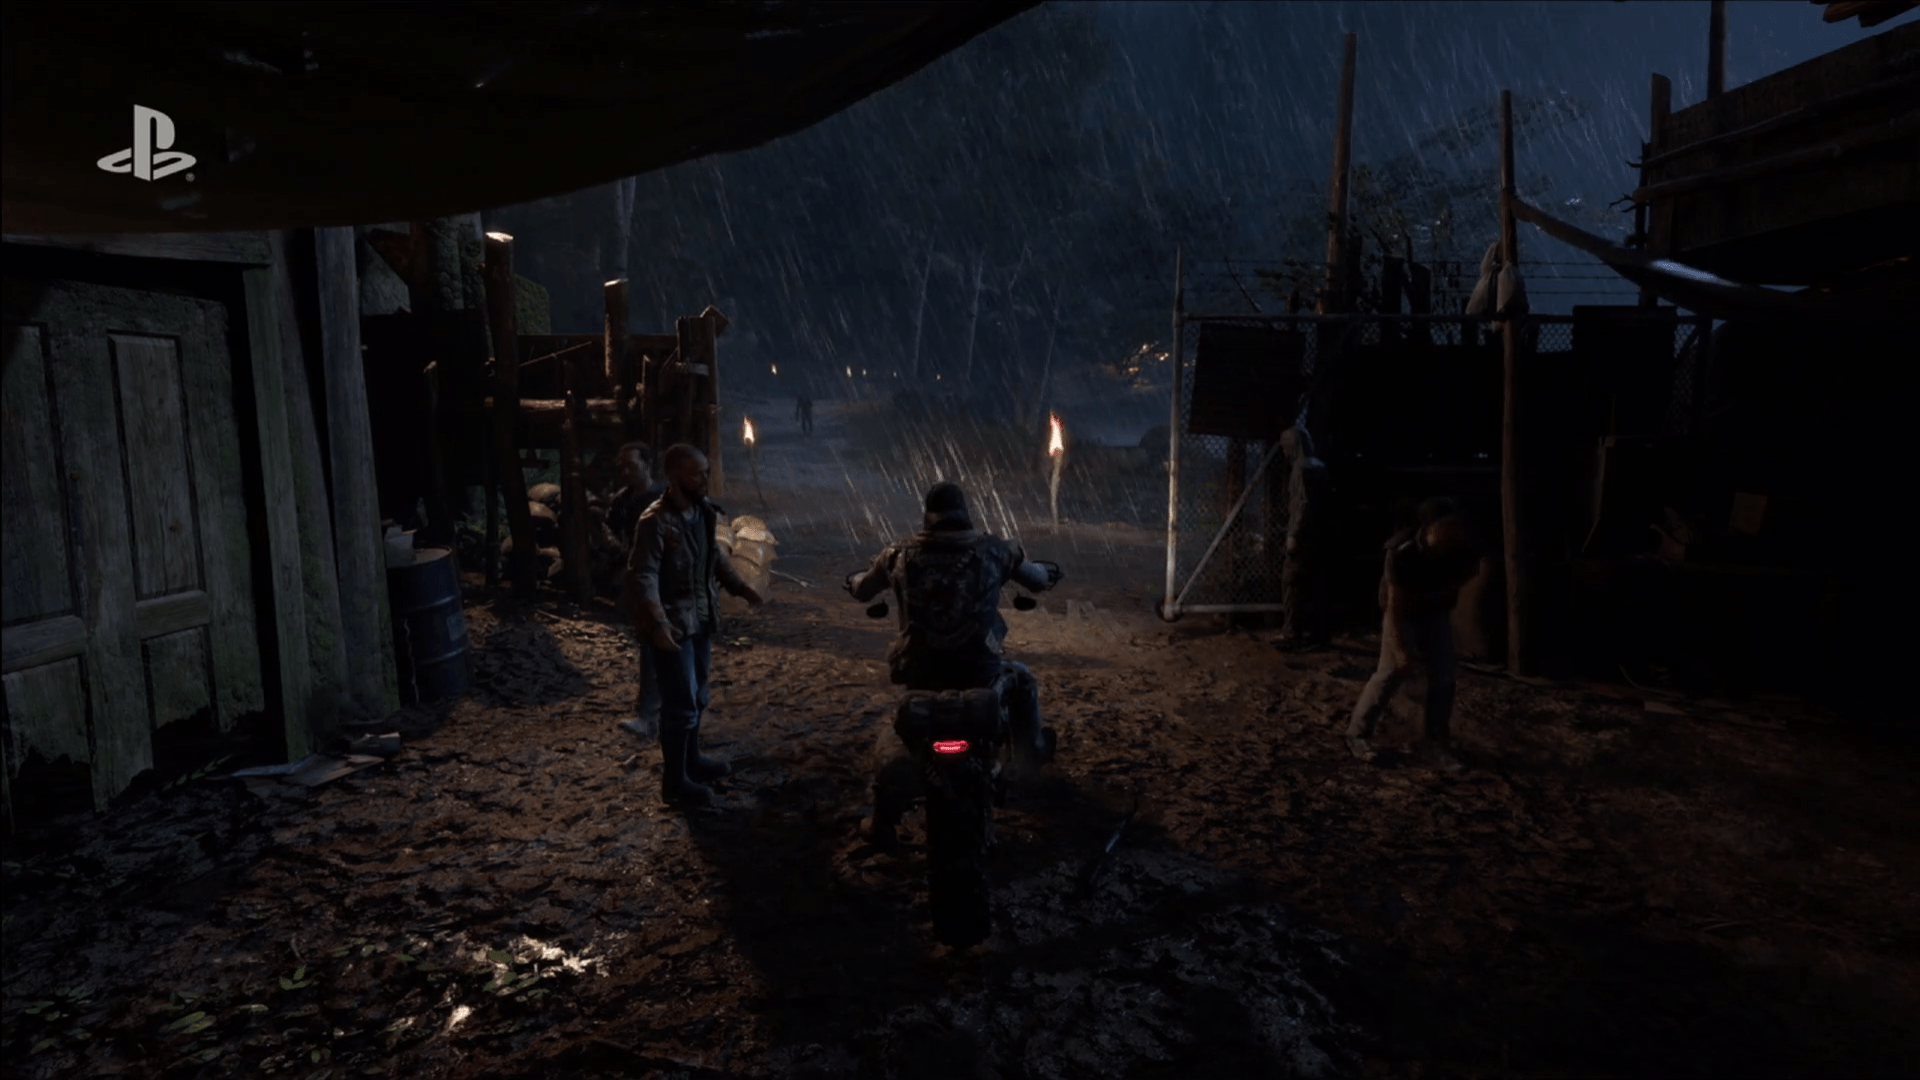 Days Gone Gameplay Shown at Sony E3 Press Conference